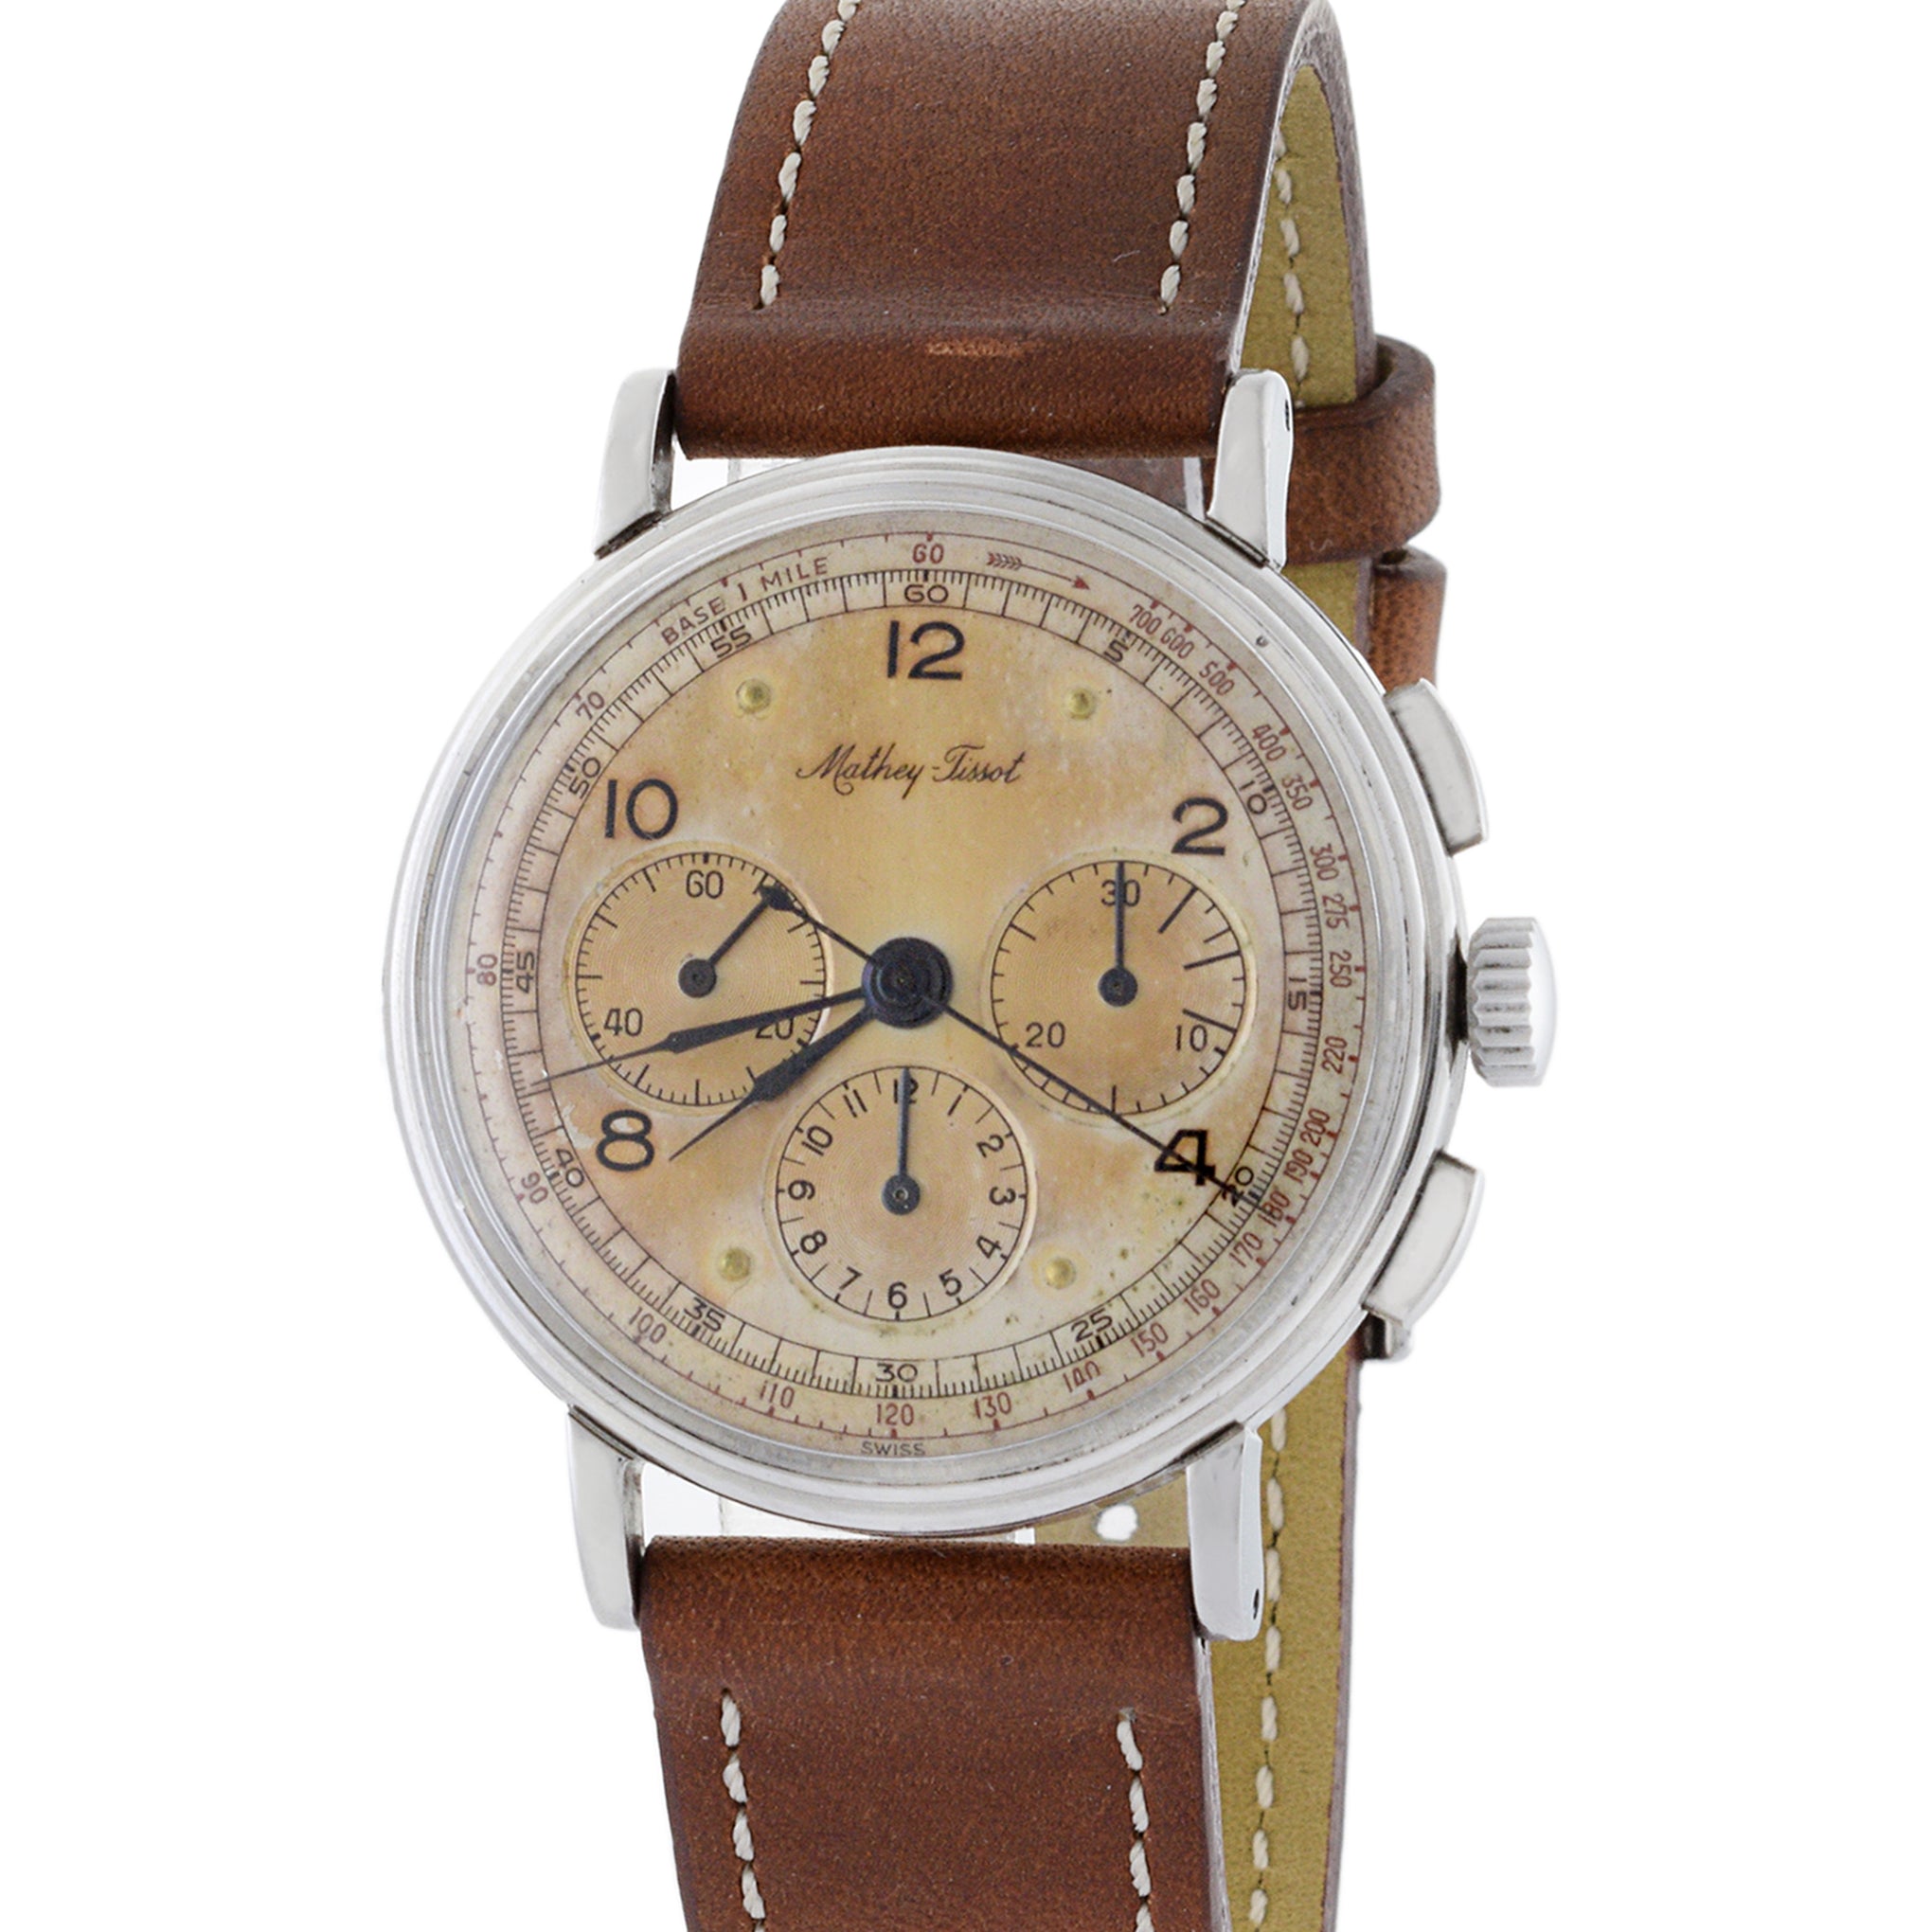 Mathey Tissot 1940's Stainless Steel Chronograph